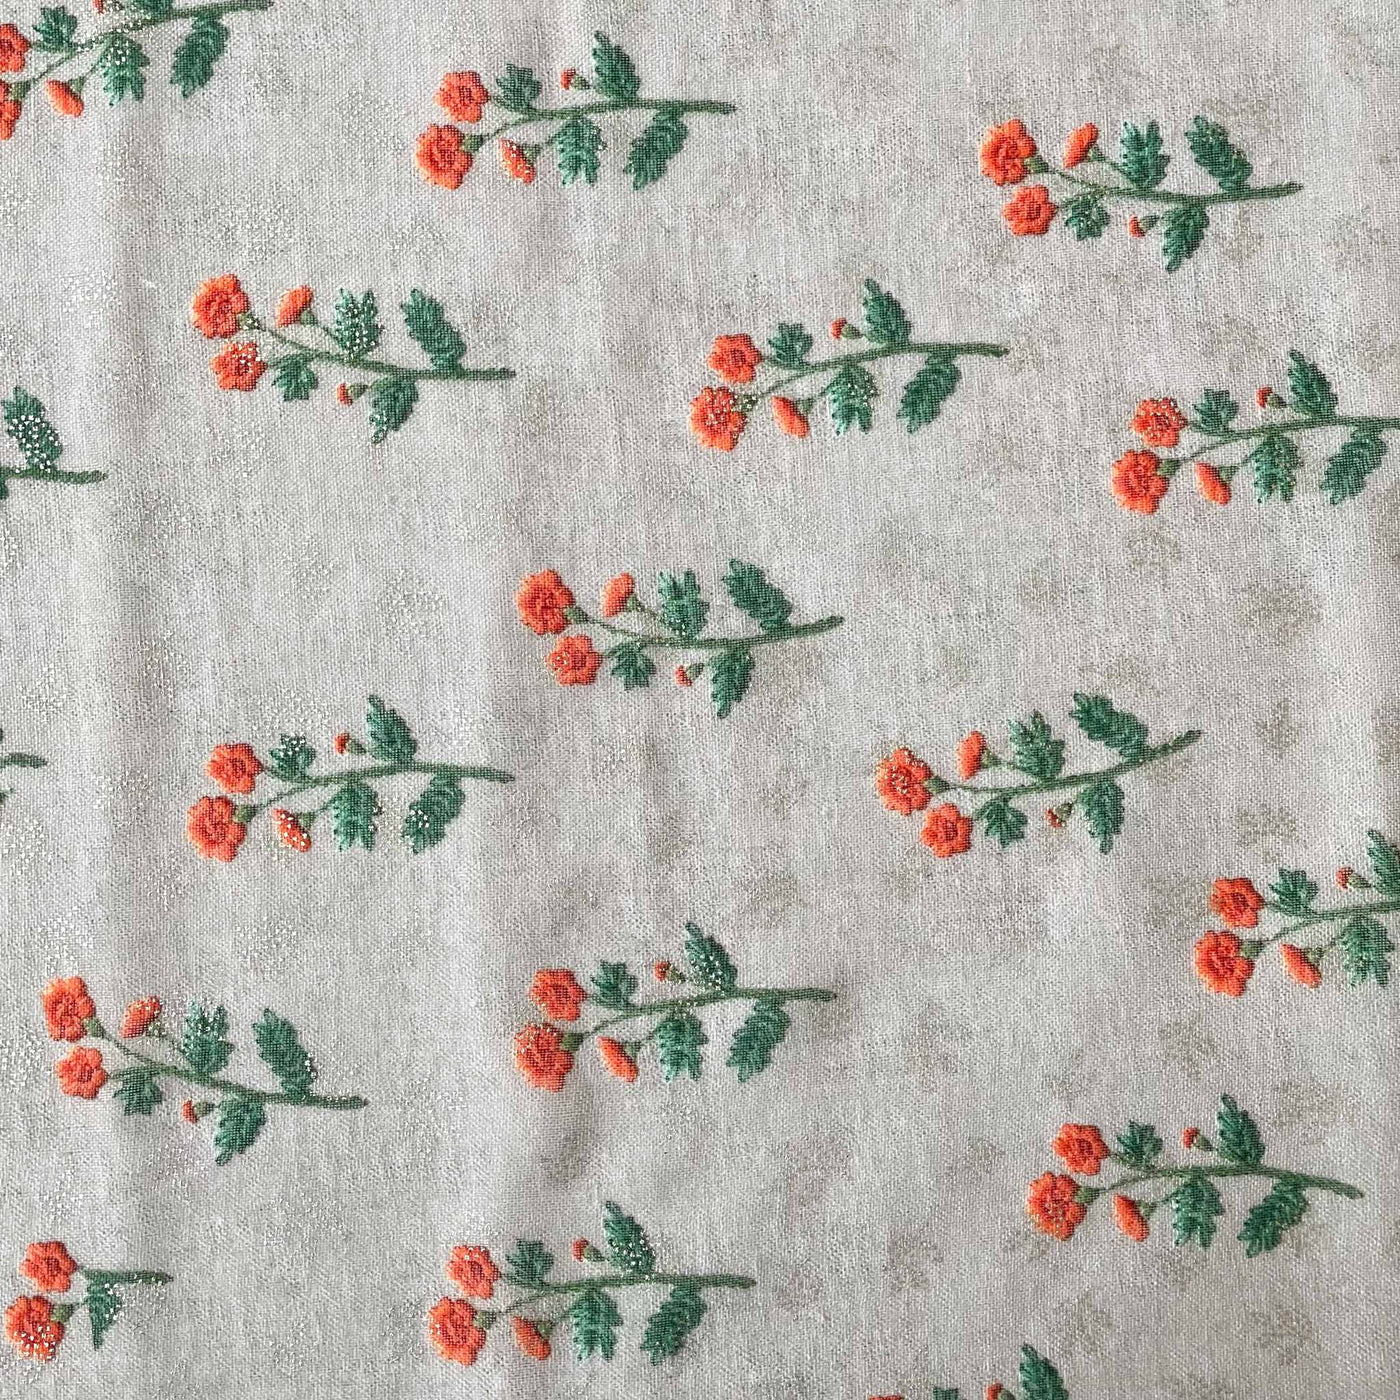 Digital Printed Linen Neps Cut Piece (CUT PIECE) Light Grey and Orange Blooming Gypsies Digital & Foil Printed Linen Neps Fabric (Width 44 Inches)